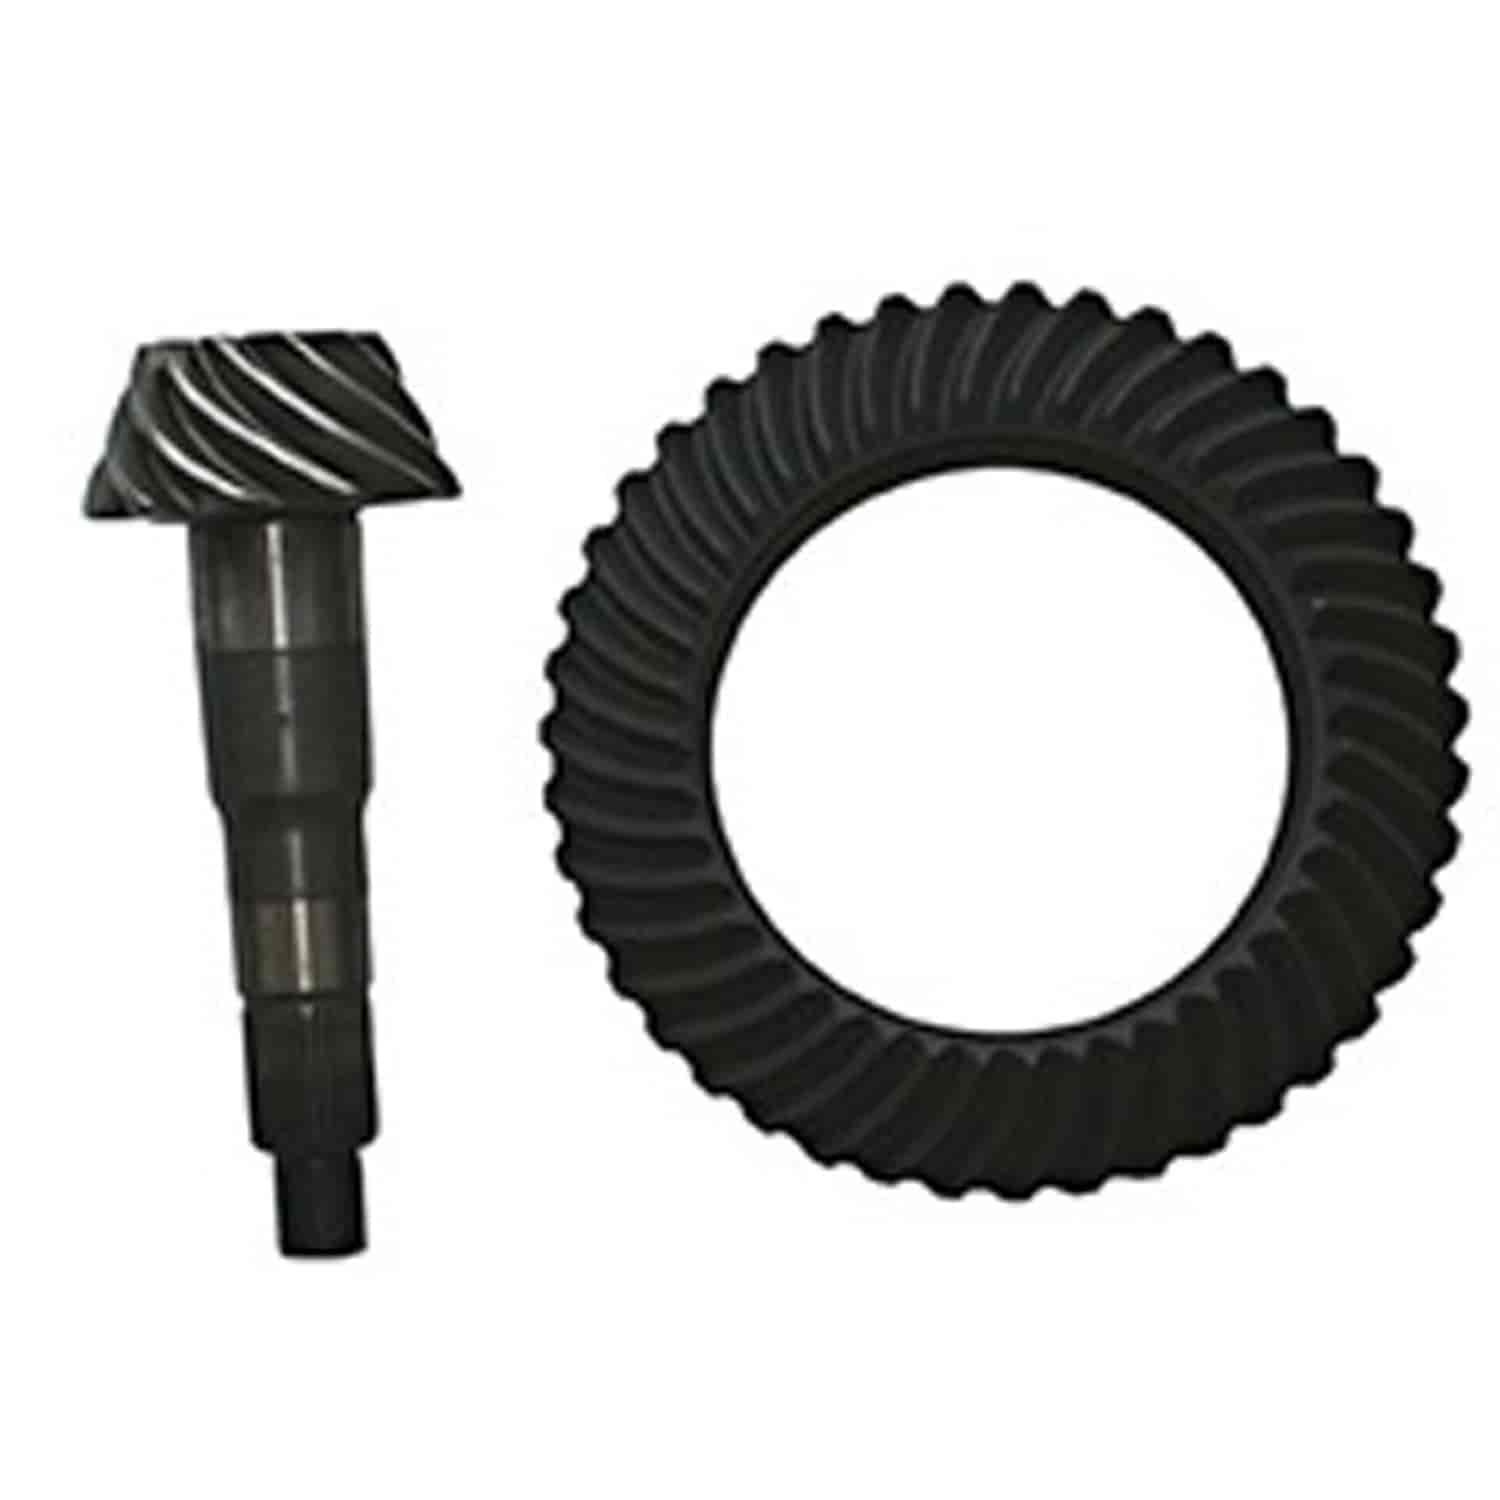 Ring/Pinion for Dana 44 3.73 1996-1998 Jeep Grand Cherokee ZJ By Omix-ADA